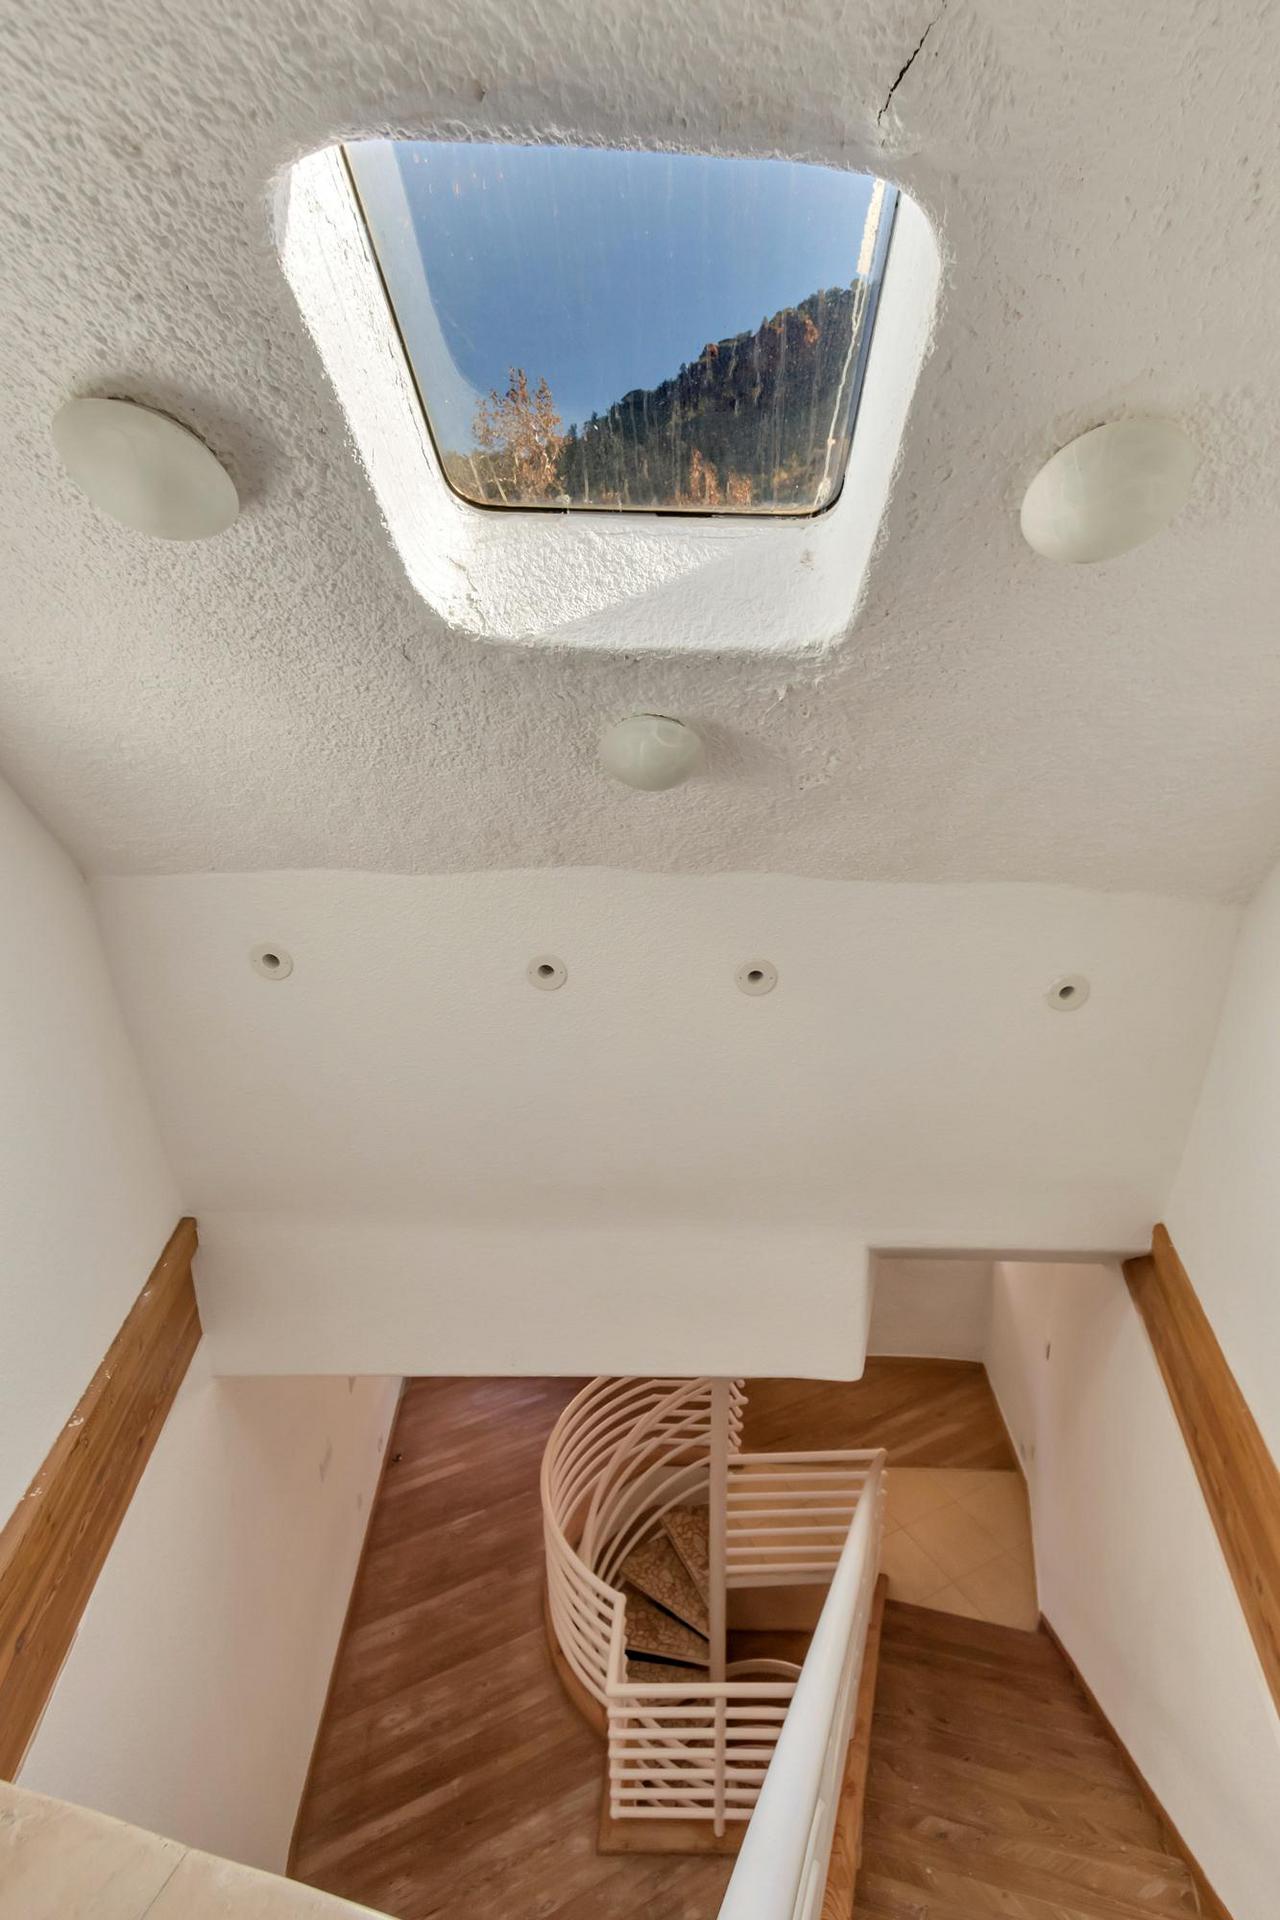 Vertical Scope of the Home.